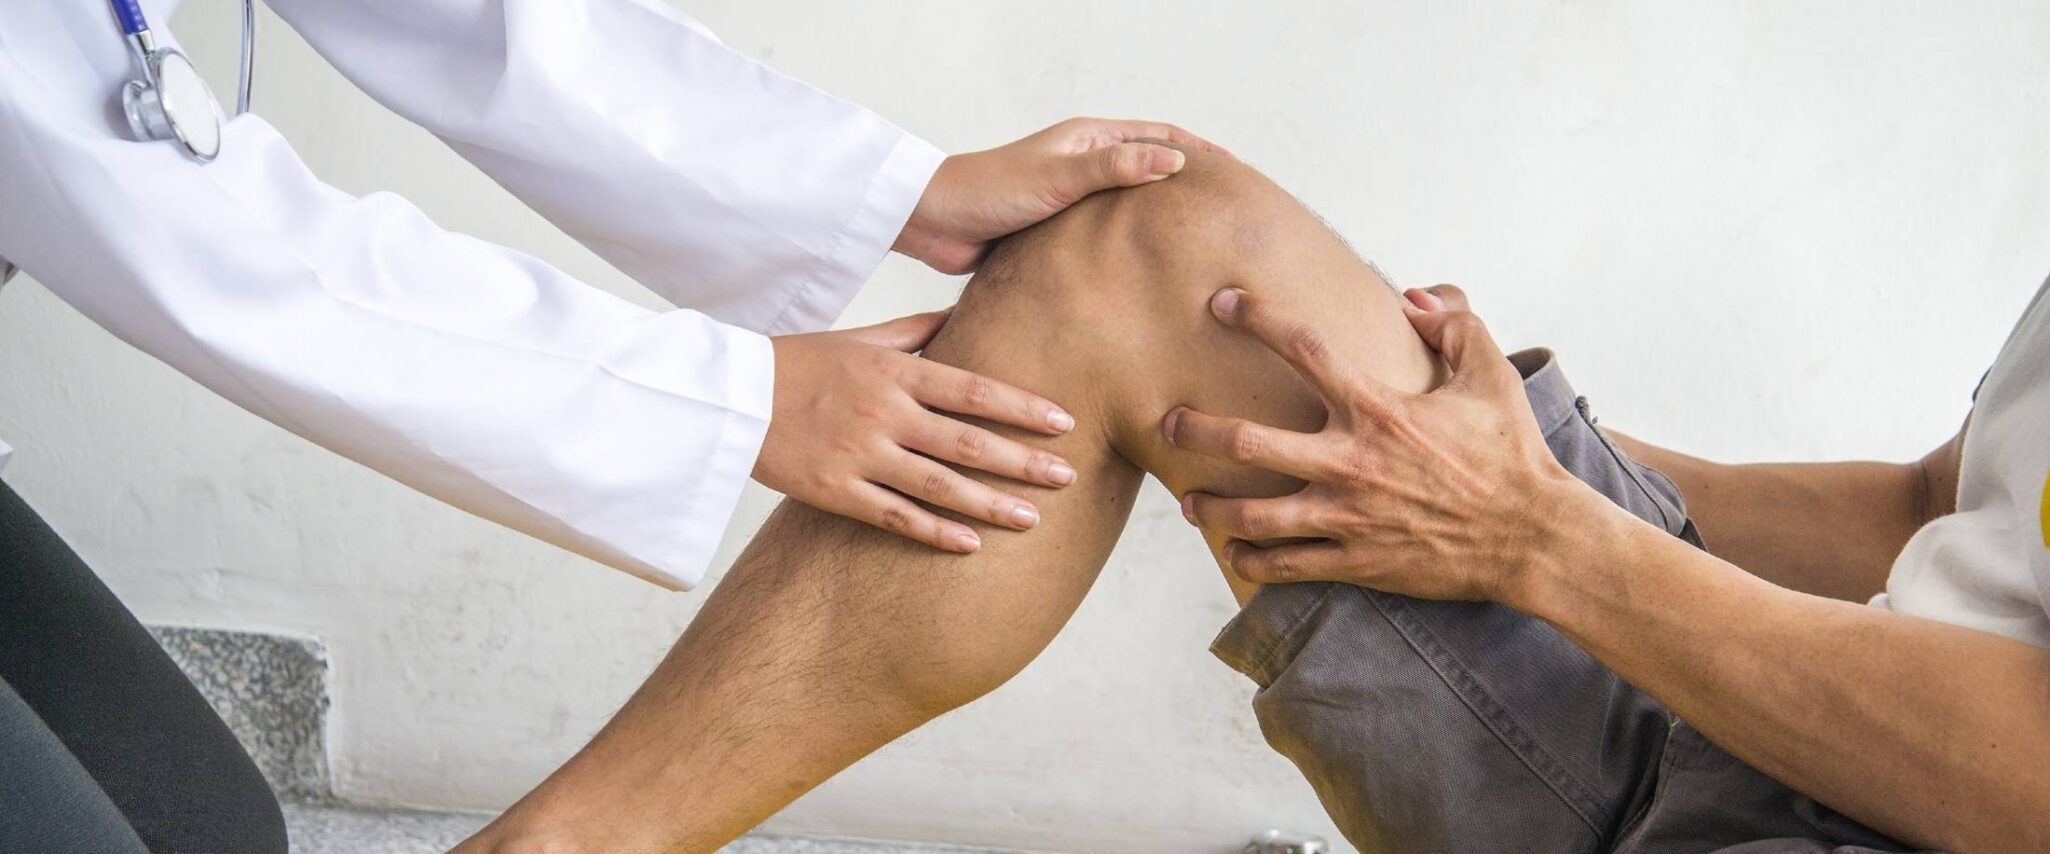 How to Elevate the Leg After Knee Replacement 